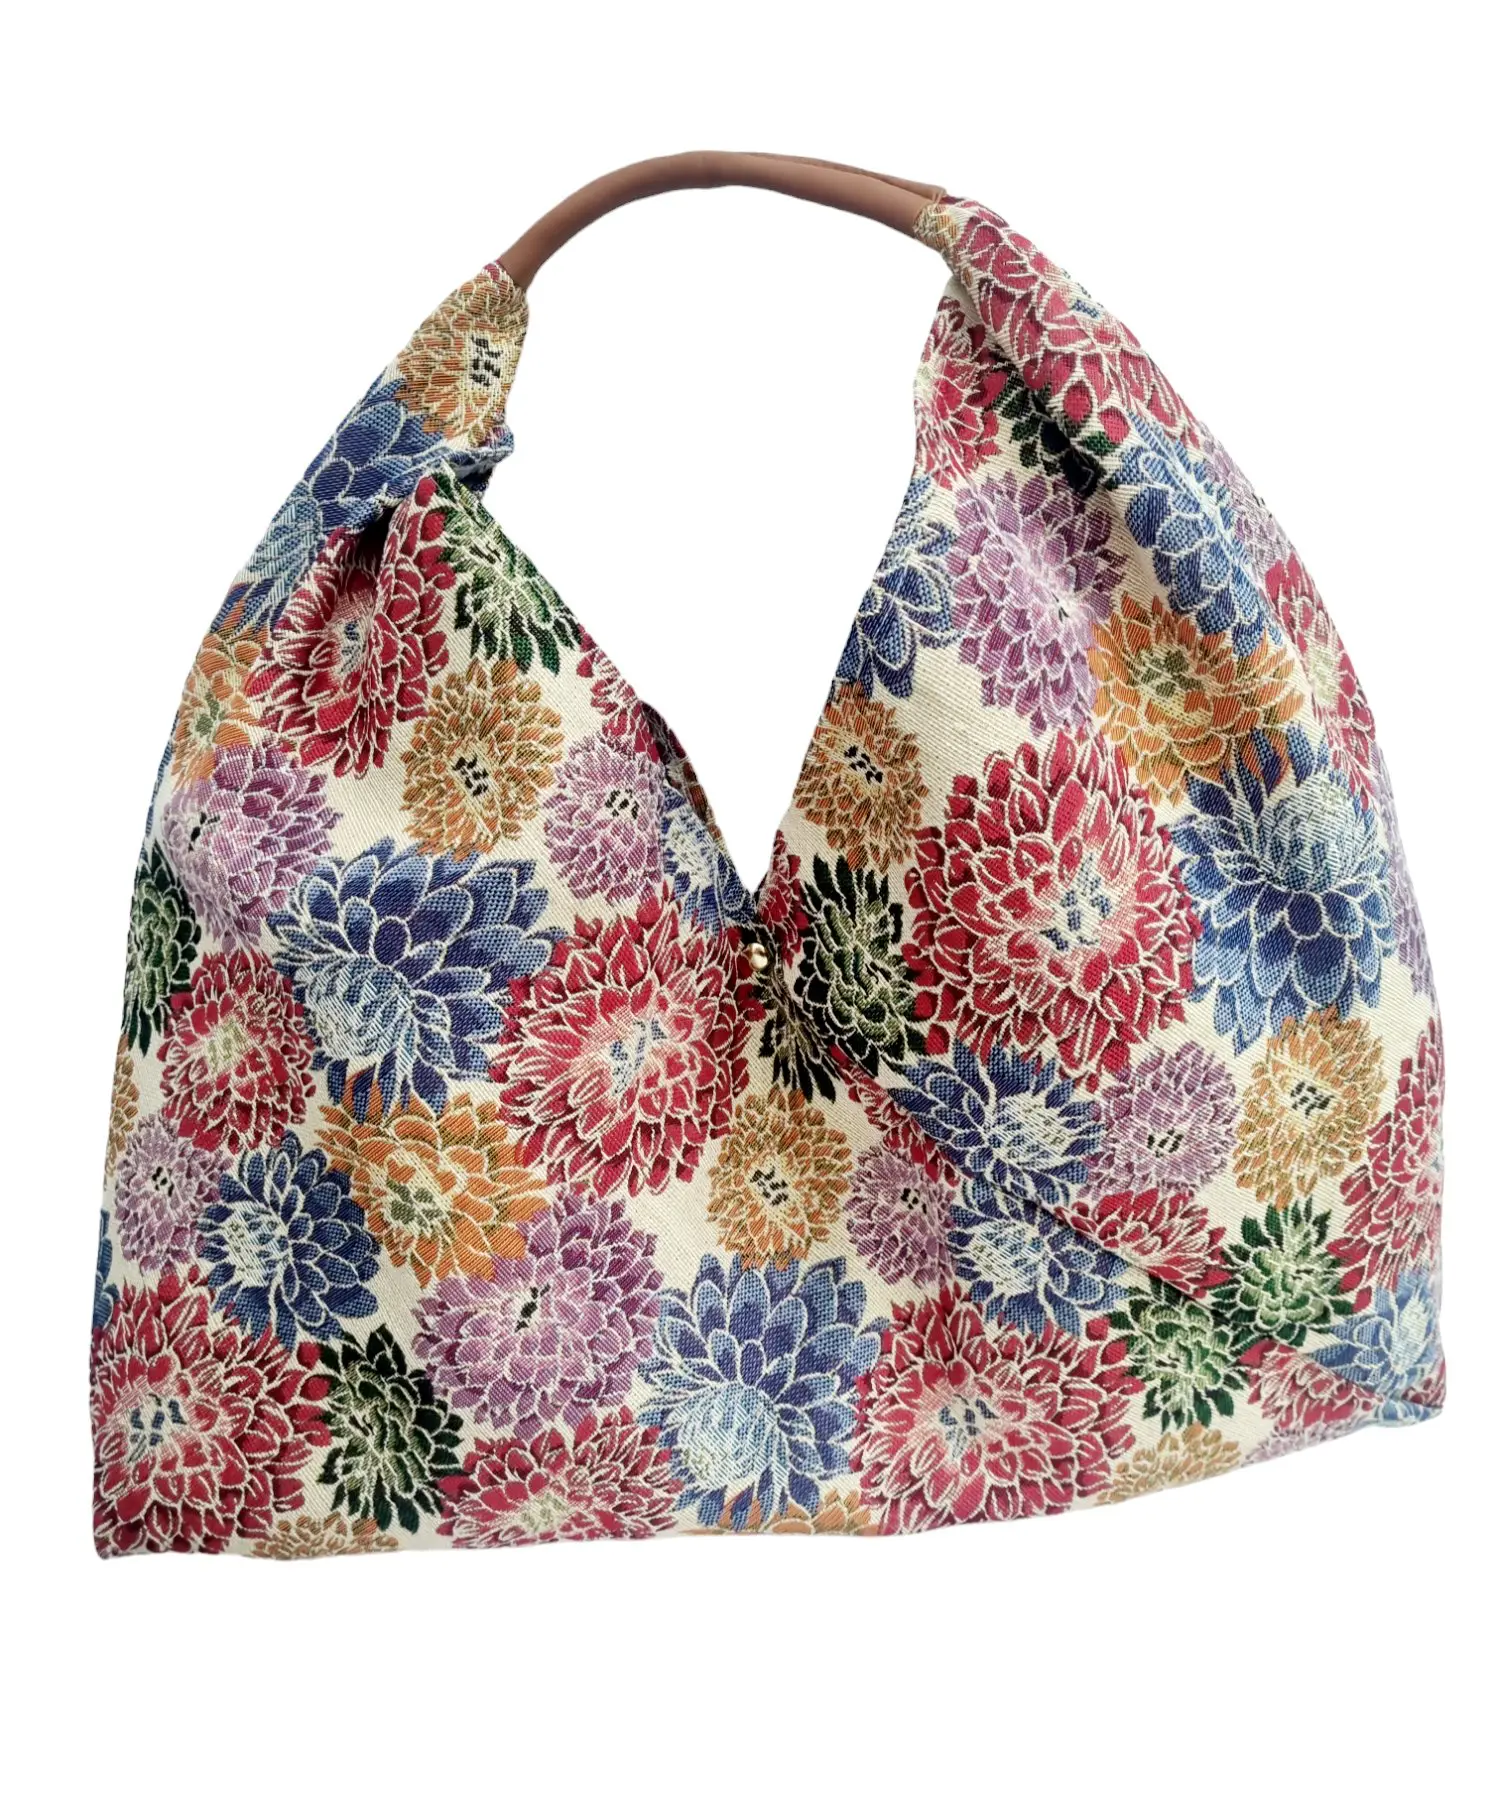 Bag in flower print fabric, genuine leather handle - Large size - Closure with magnetic button Measurements L52 H31 Handle width 35cm